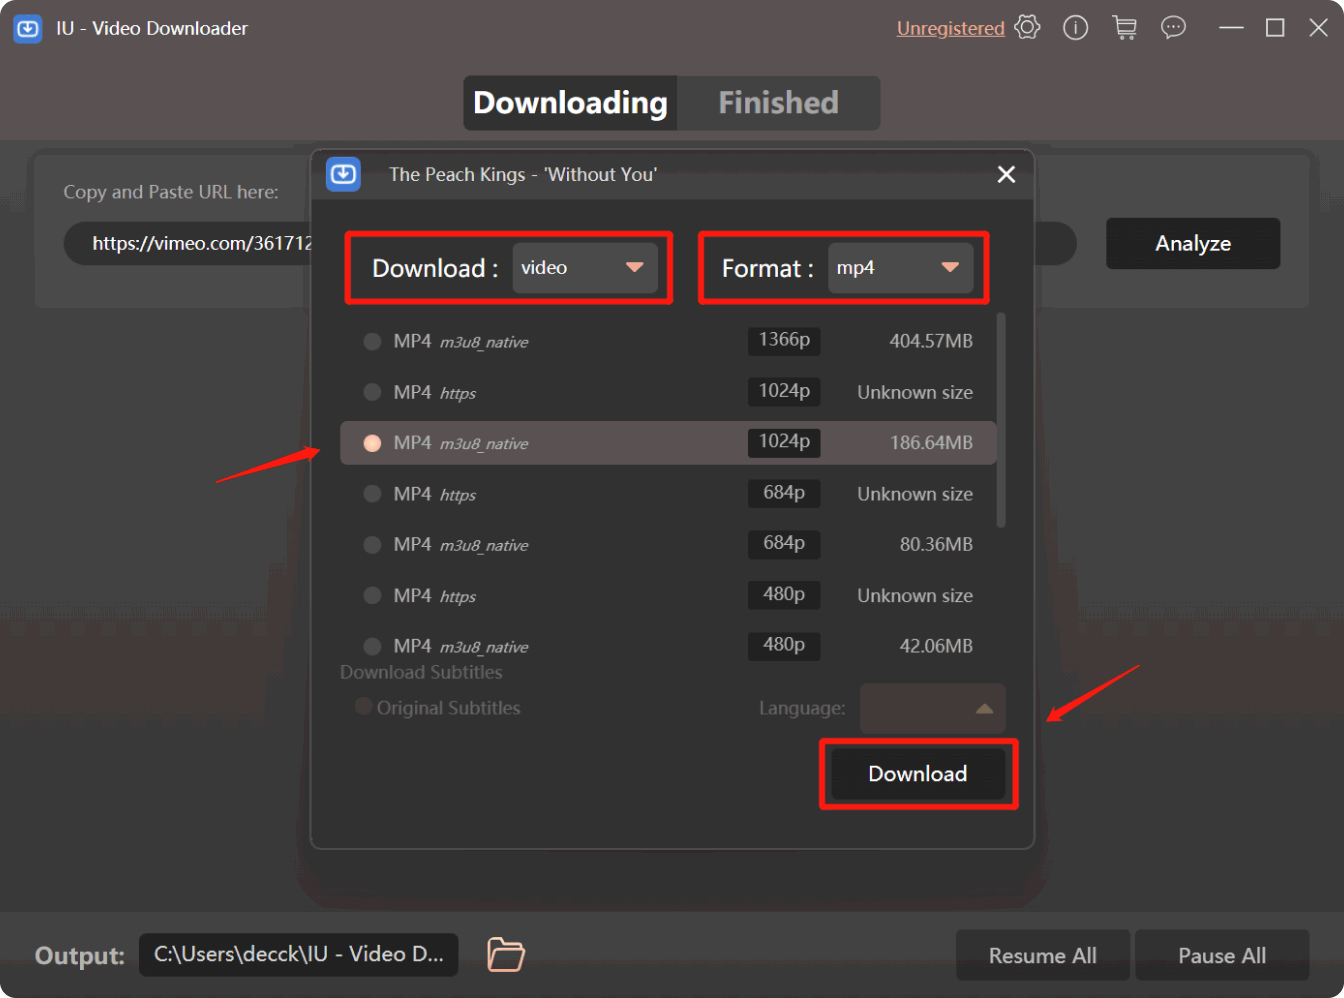 Select Output Folder and Start Downloading